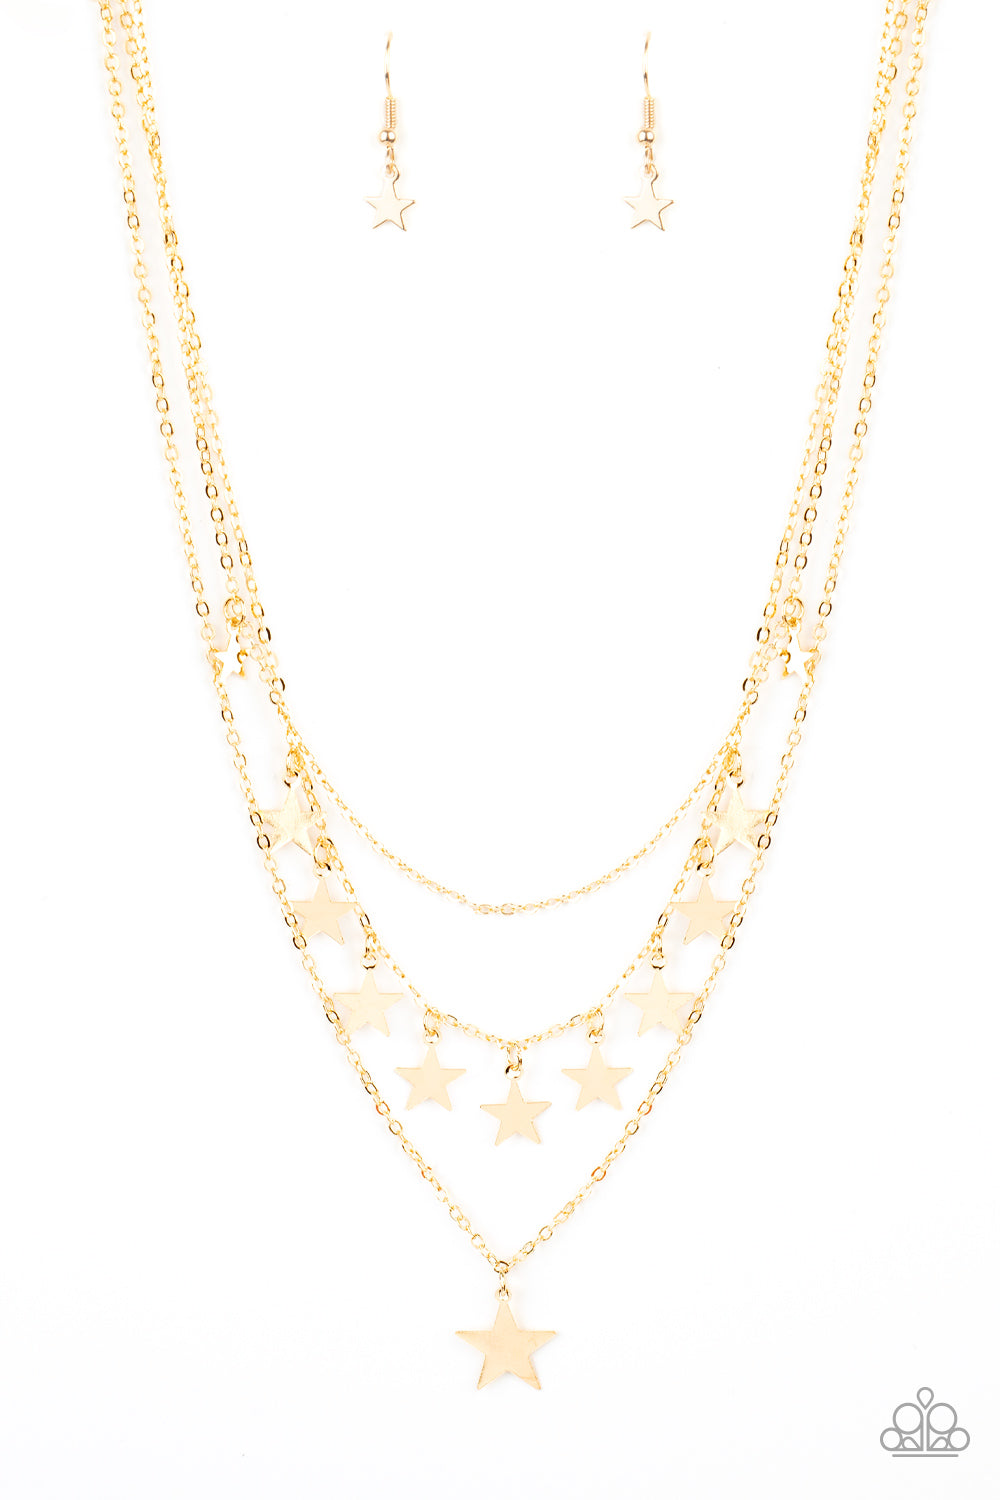 Americana Girl Gold Necklace - Paparazzi Accessories  Haphazardly dotted in shiny gold star charms, three dainty gold chains layer below the collar for a stellar look. Features an adjustable clasp closure.  Sold as one individual bracelet.